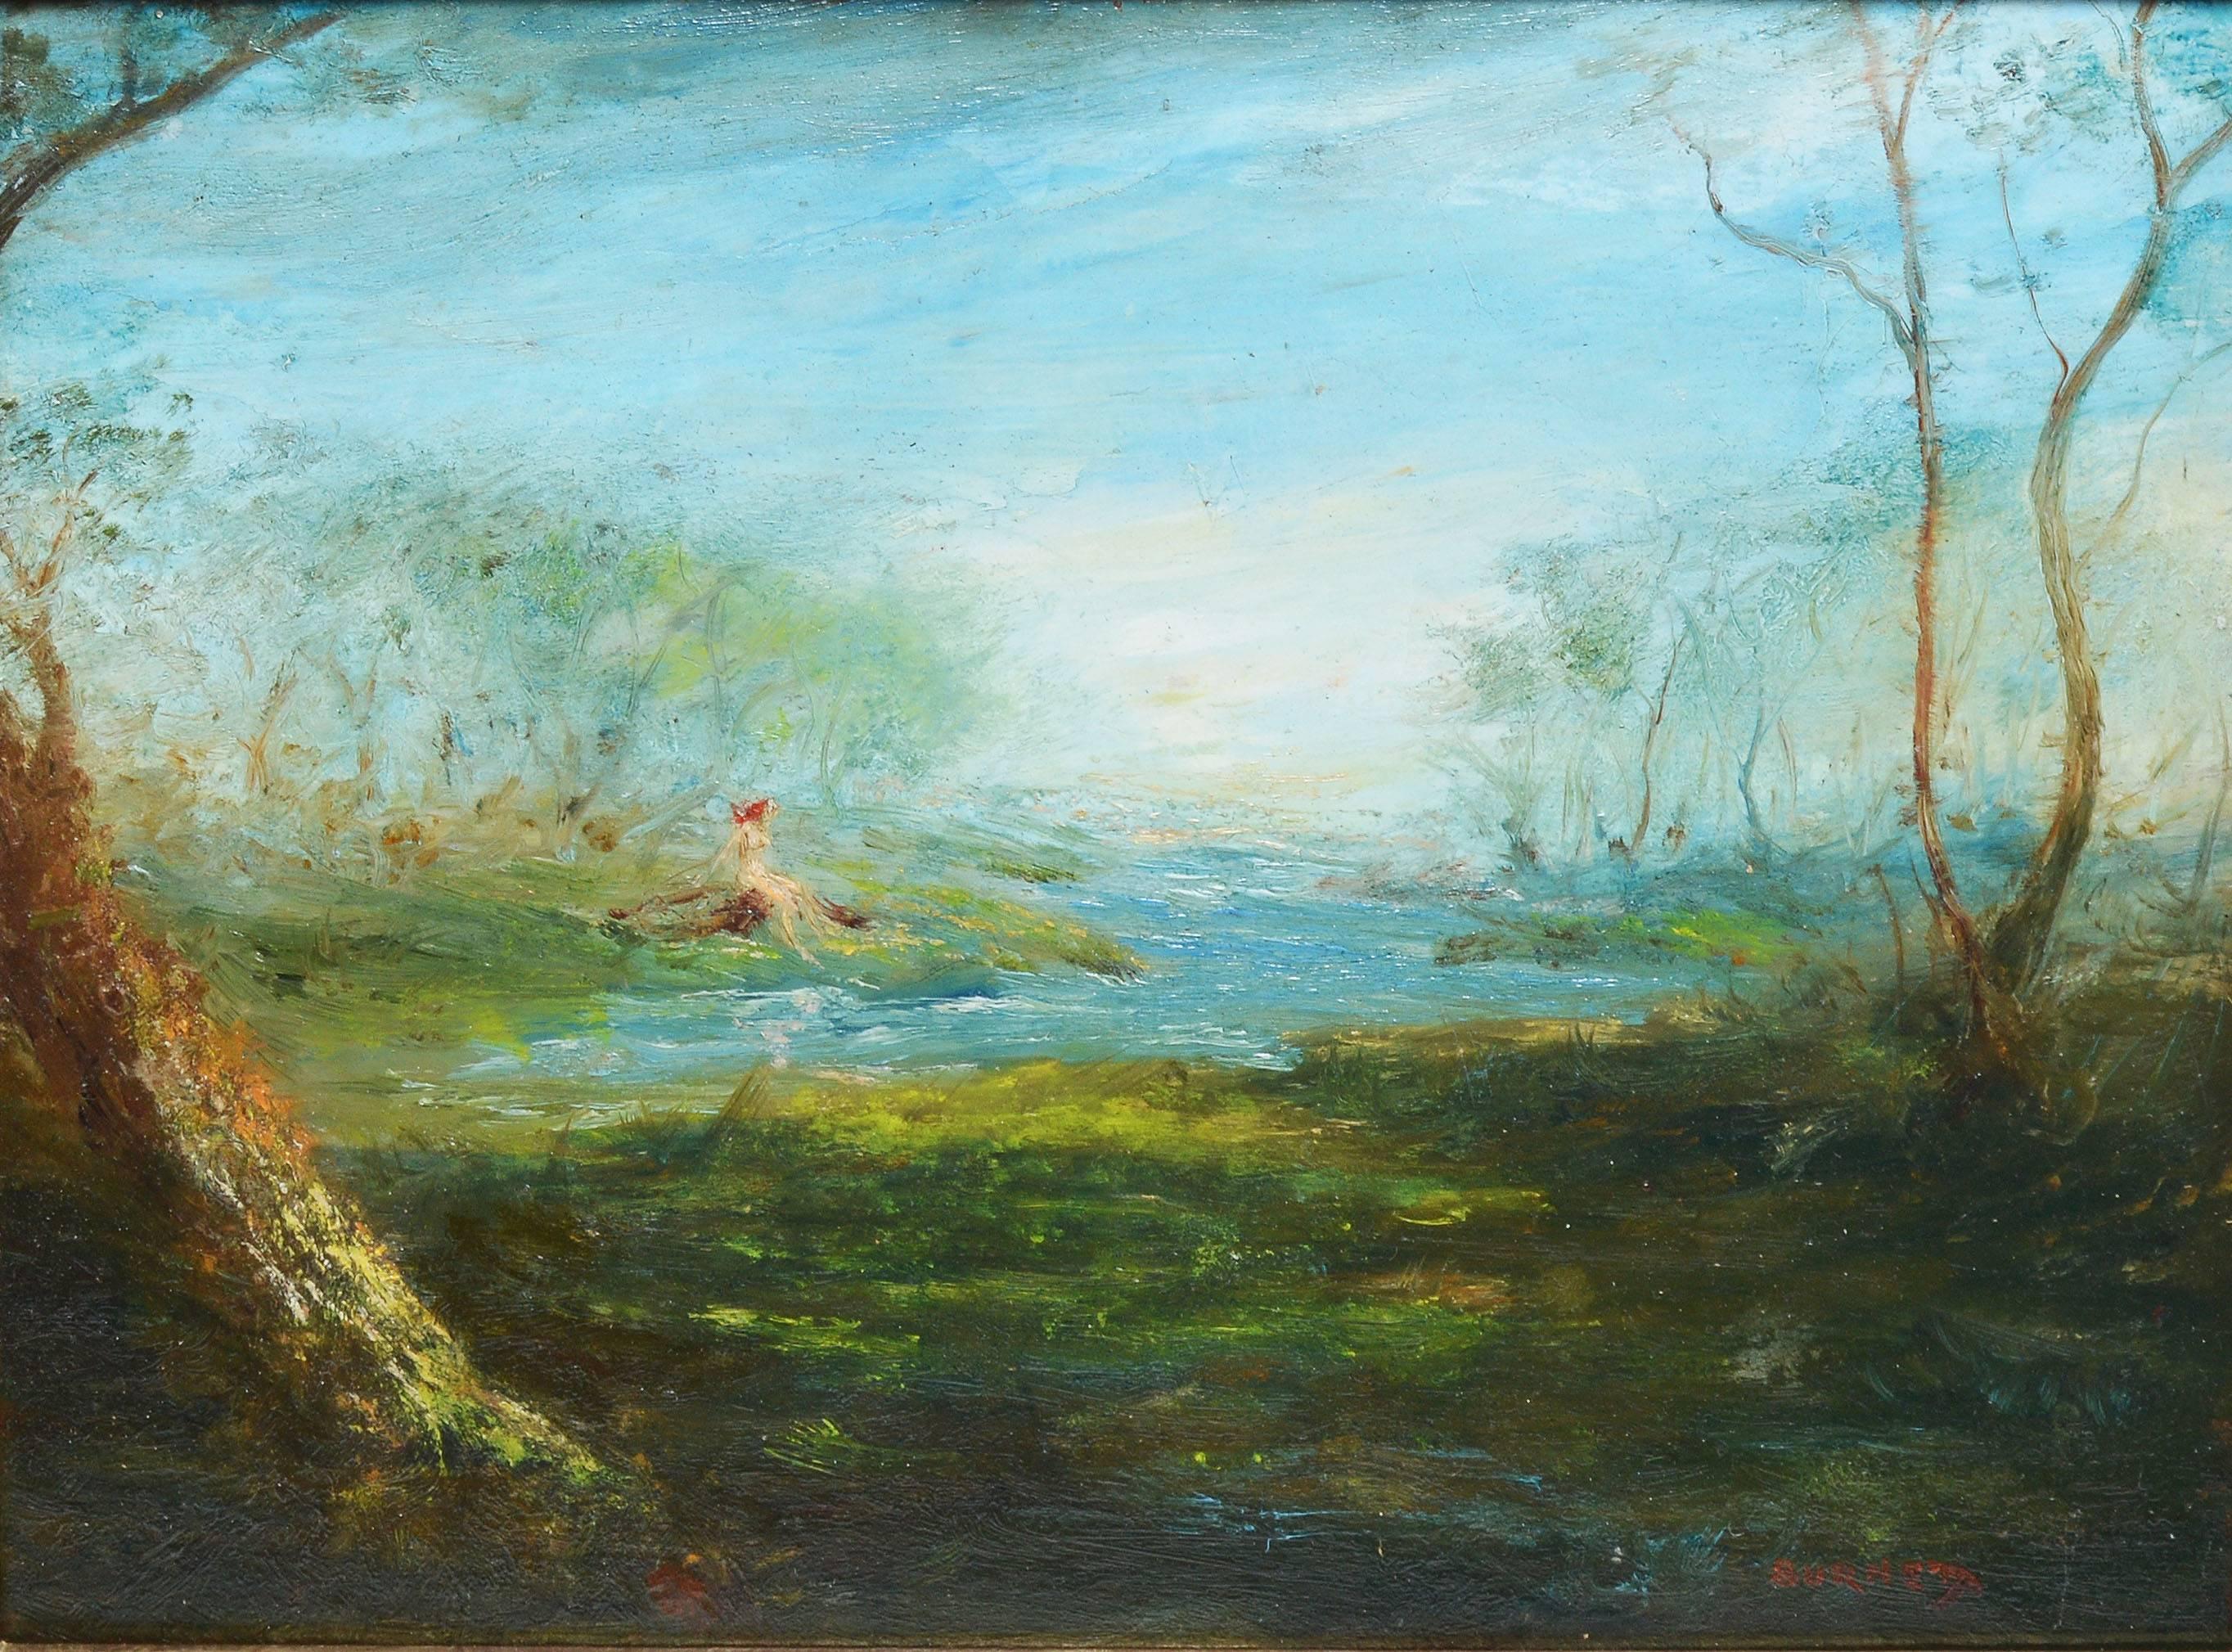 Nude Woman Bathing Along a River Edge - Brown Landscape Painting by Unknown